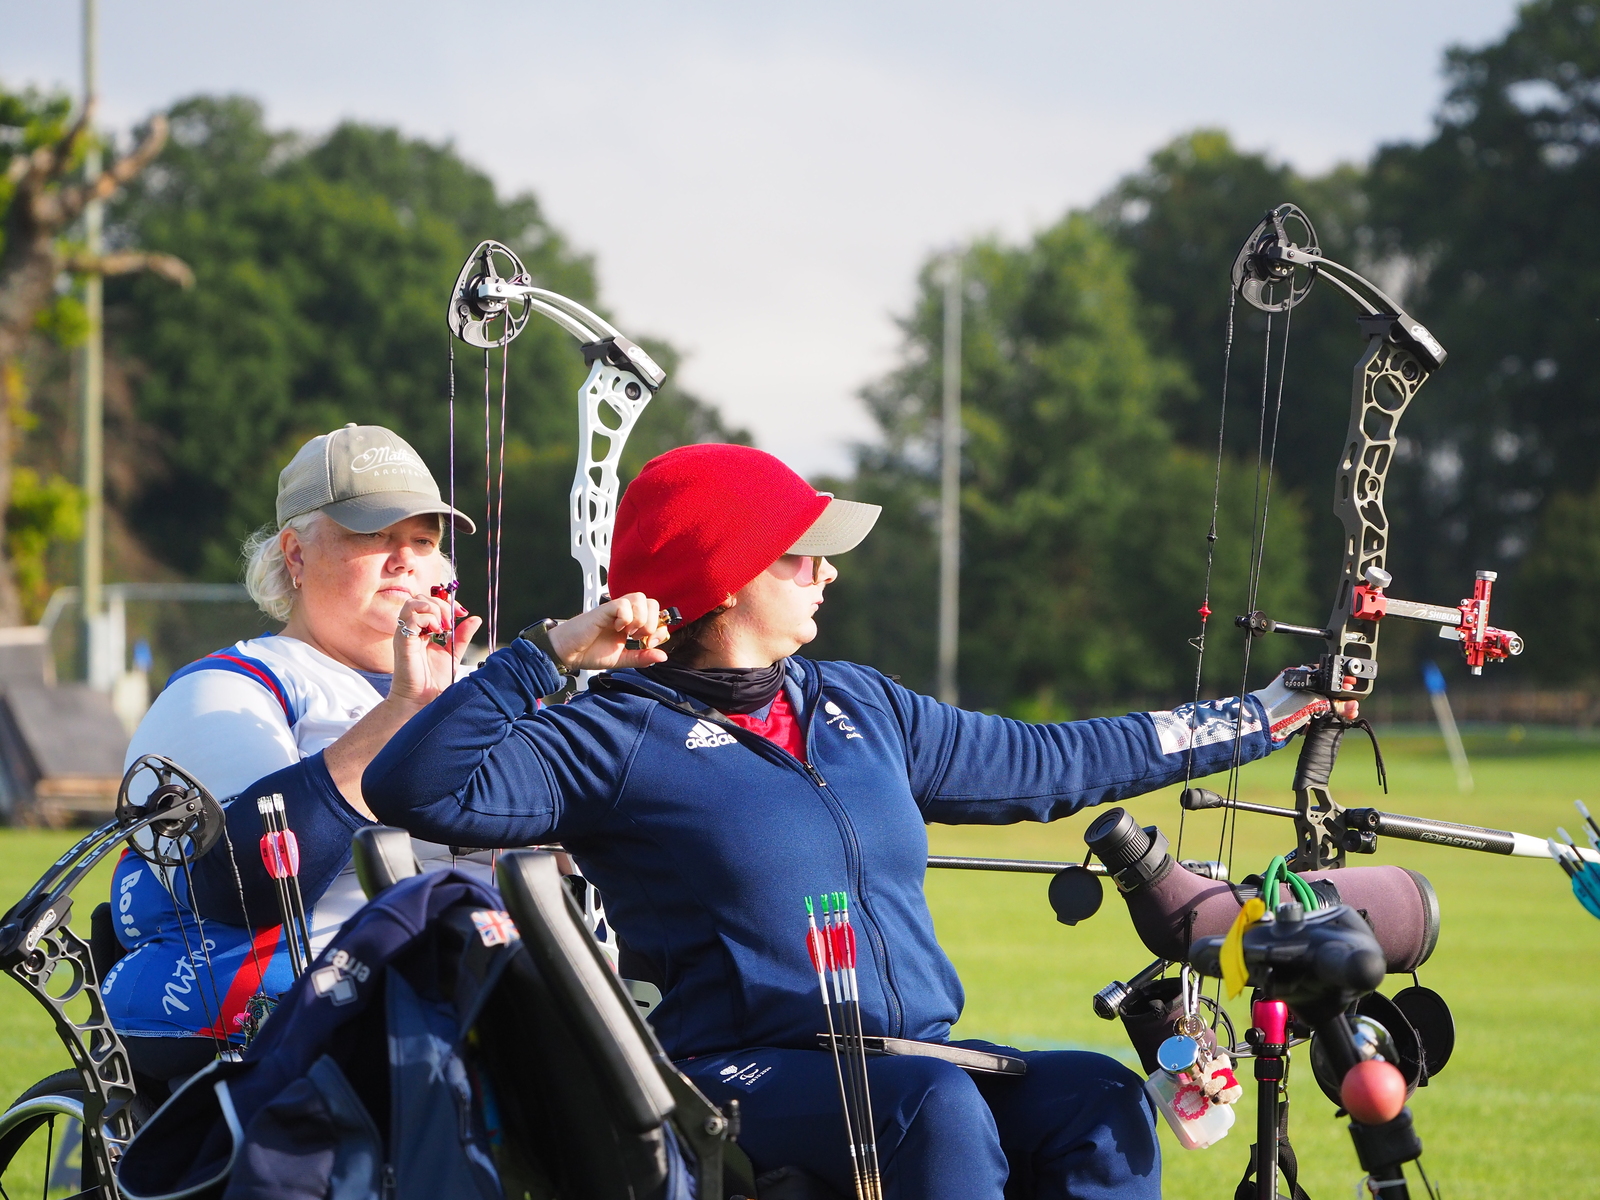 Two para archers on the shooting line at a competition